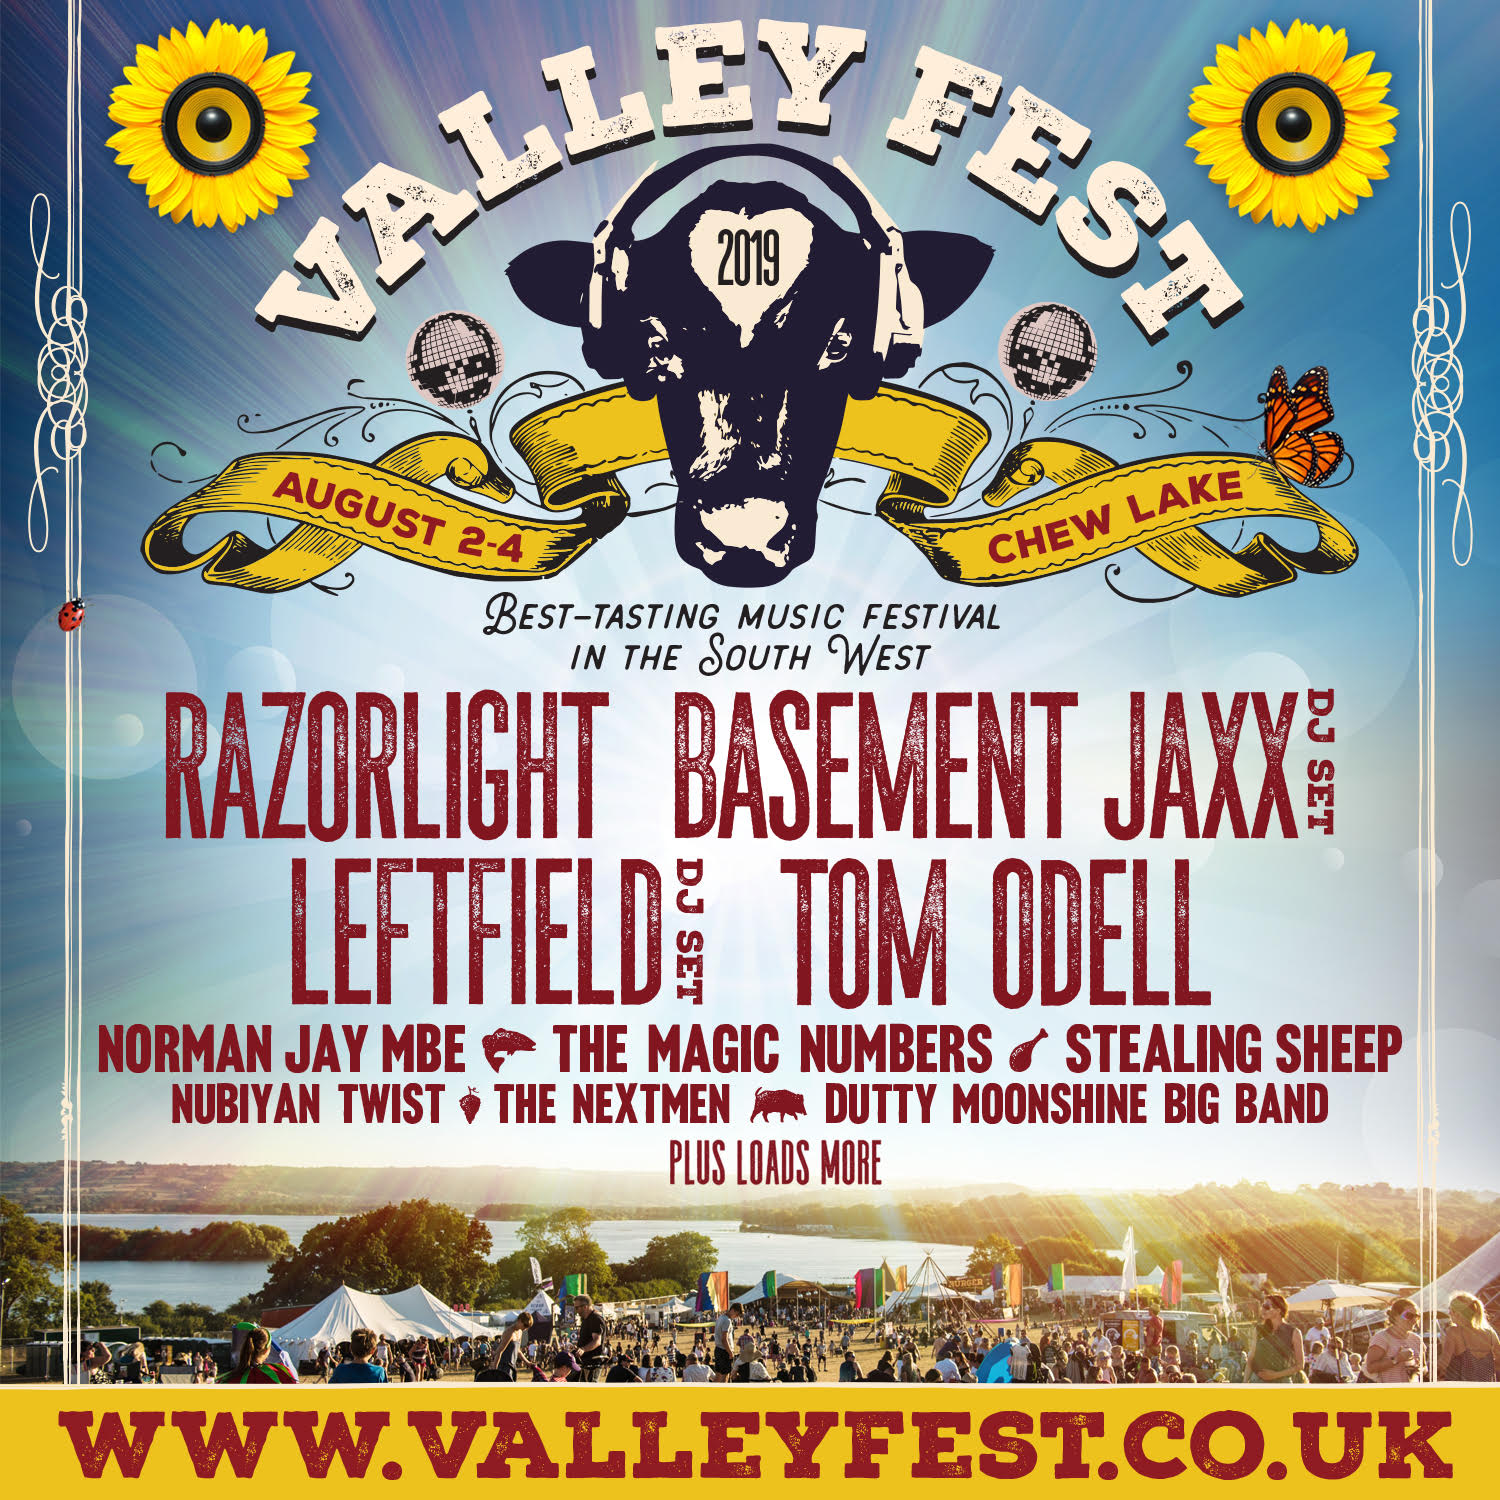 Time for Valley Fest! Sarah Kenny Residential Lettings